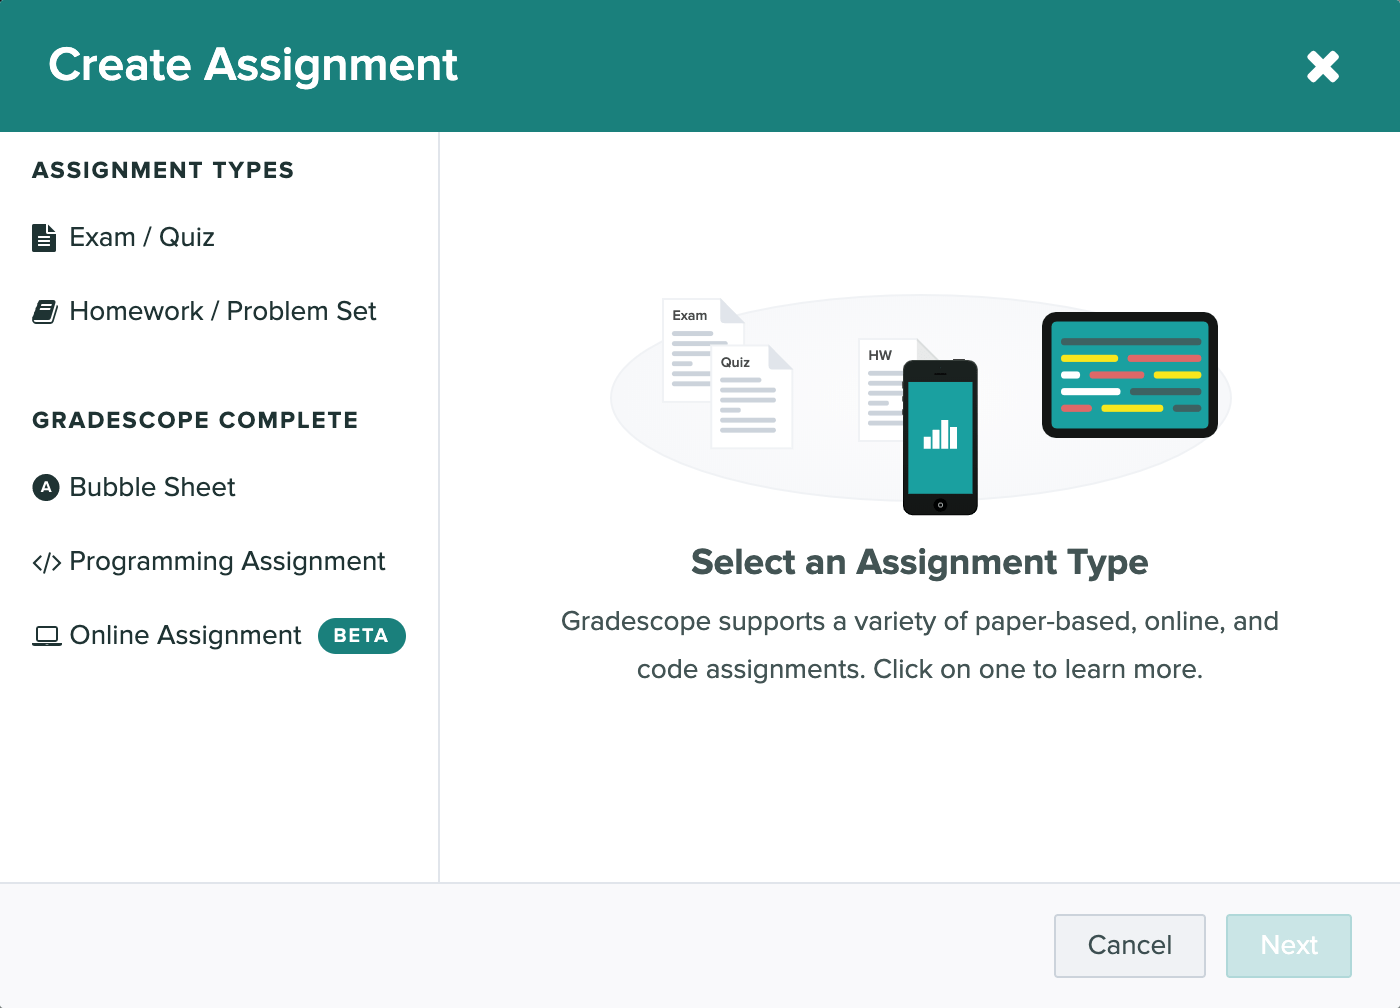 The create assignment modal with the various assignment types